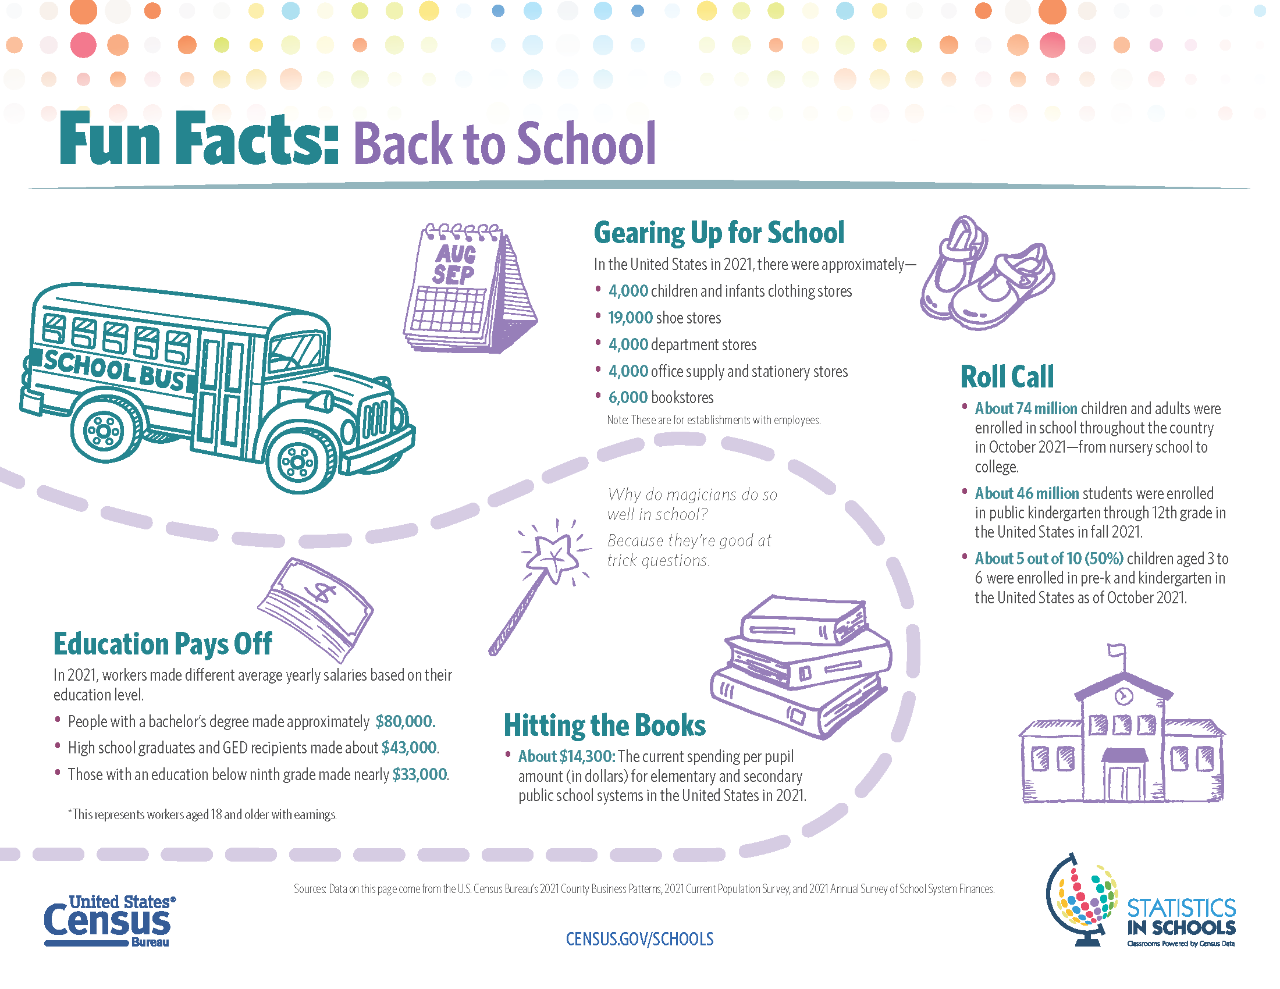 Fun Facts: Back to School